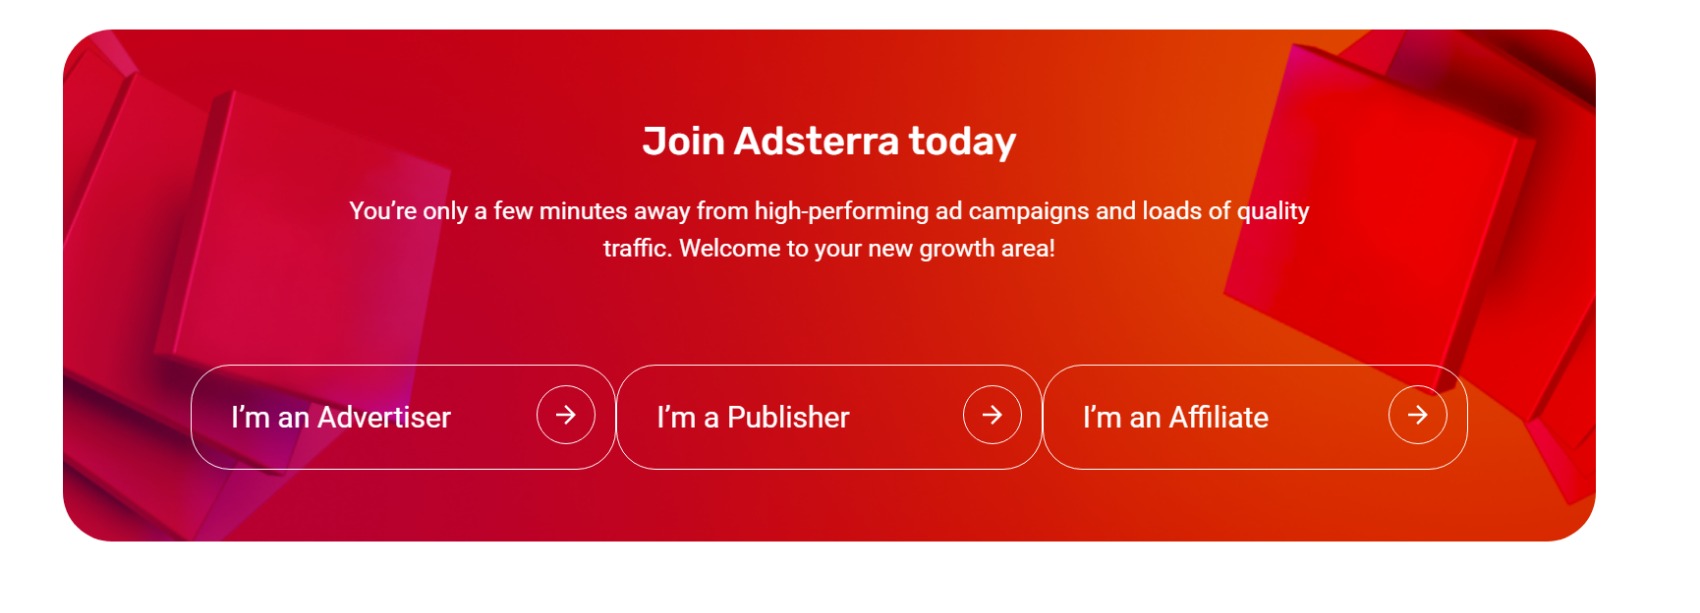 Join Adsterra today 